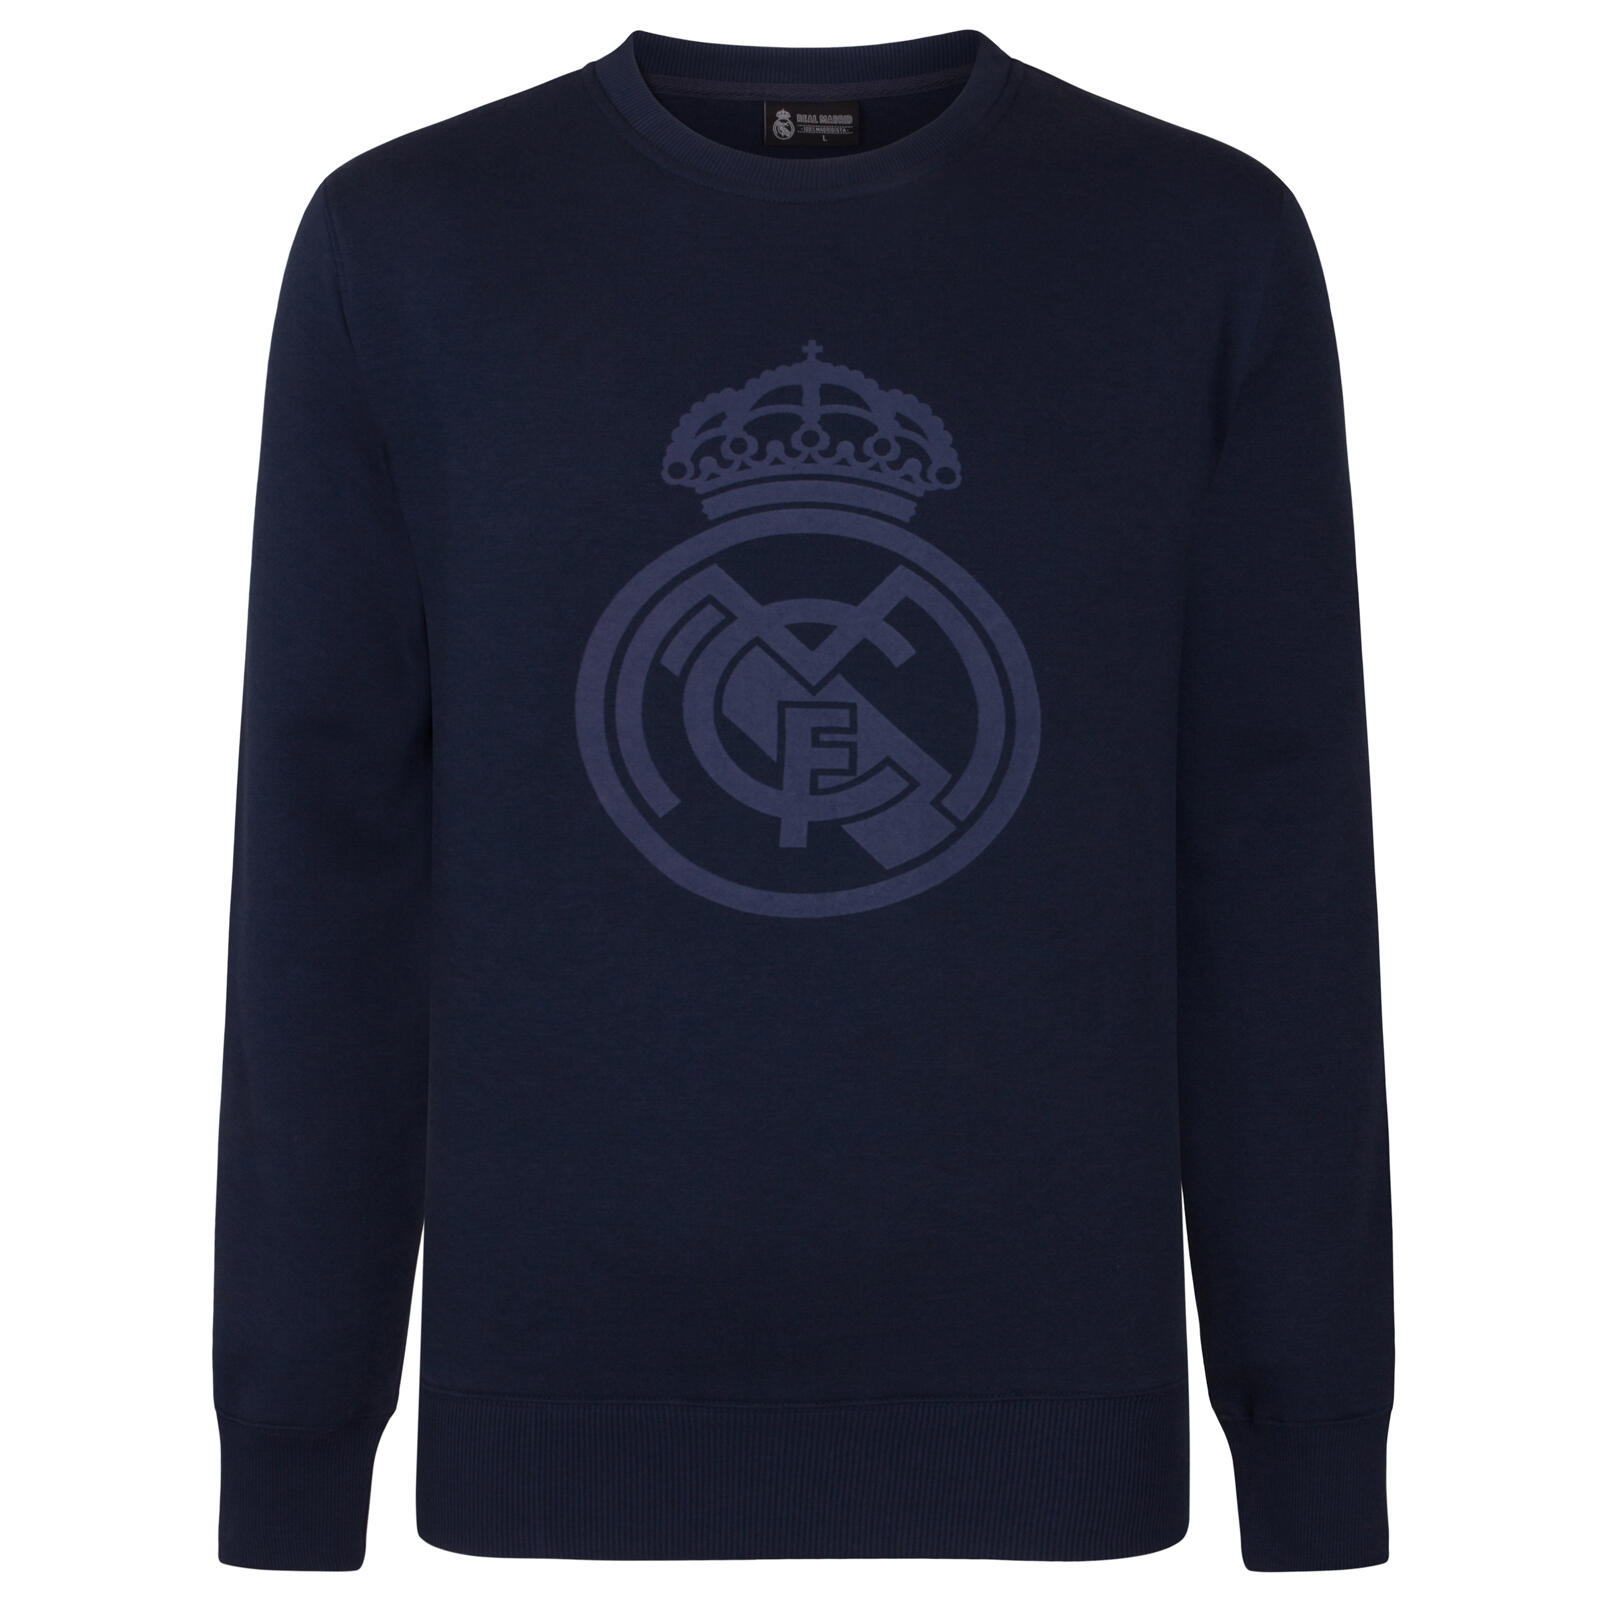 Real Madrid Boys Sweatshirt Graphic Top Kids OFFICIAL Football Gift 1/3